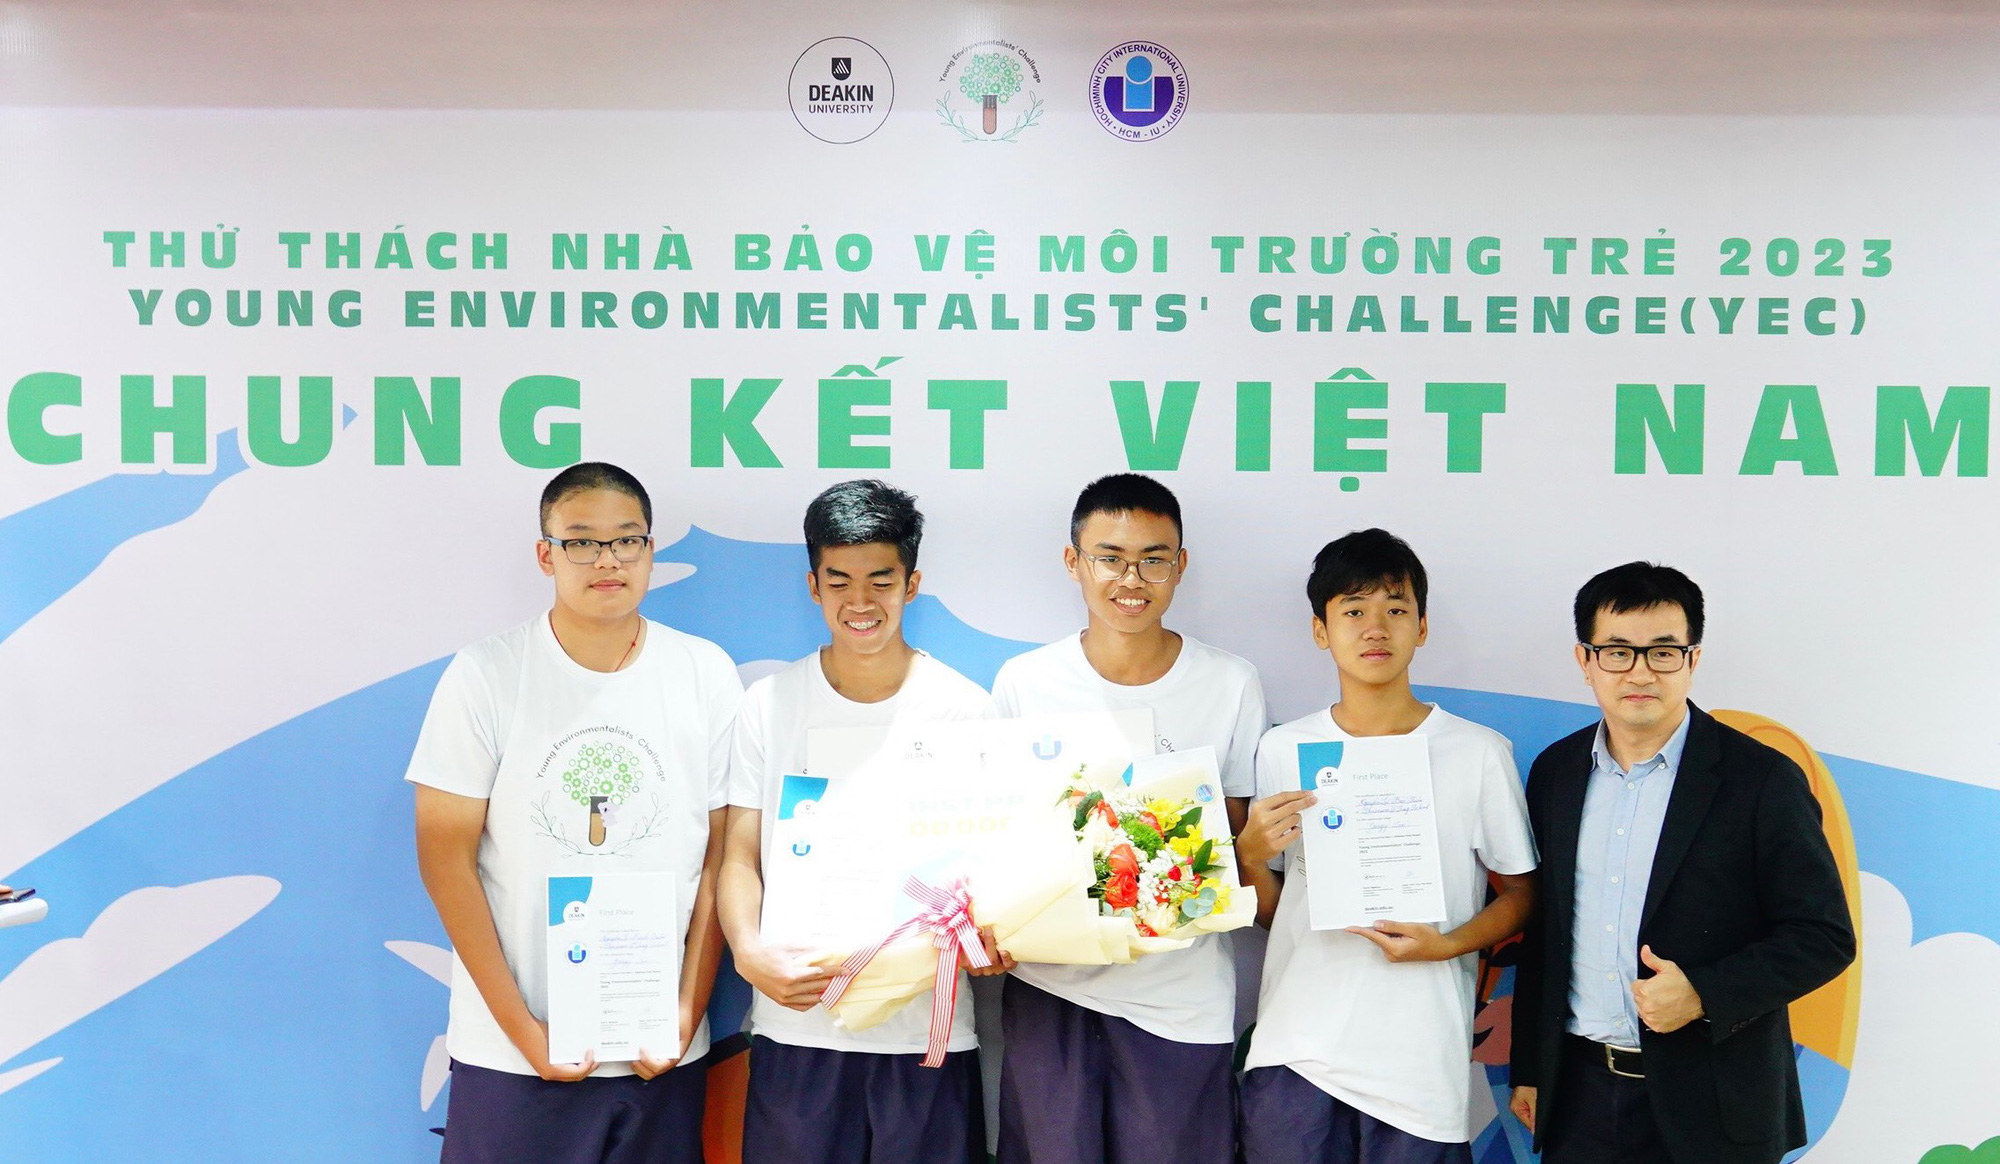 Vietnamese students win first prize at int’l environmental protection contest